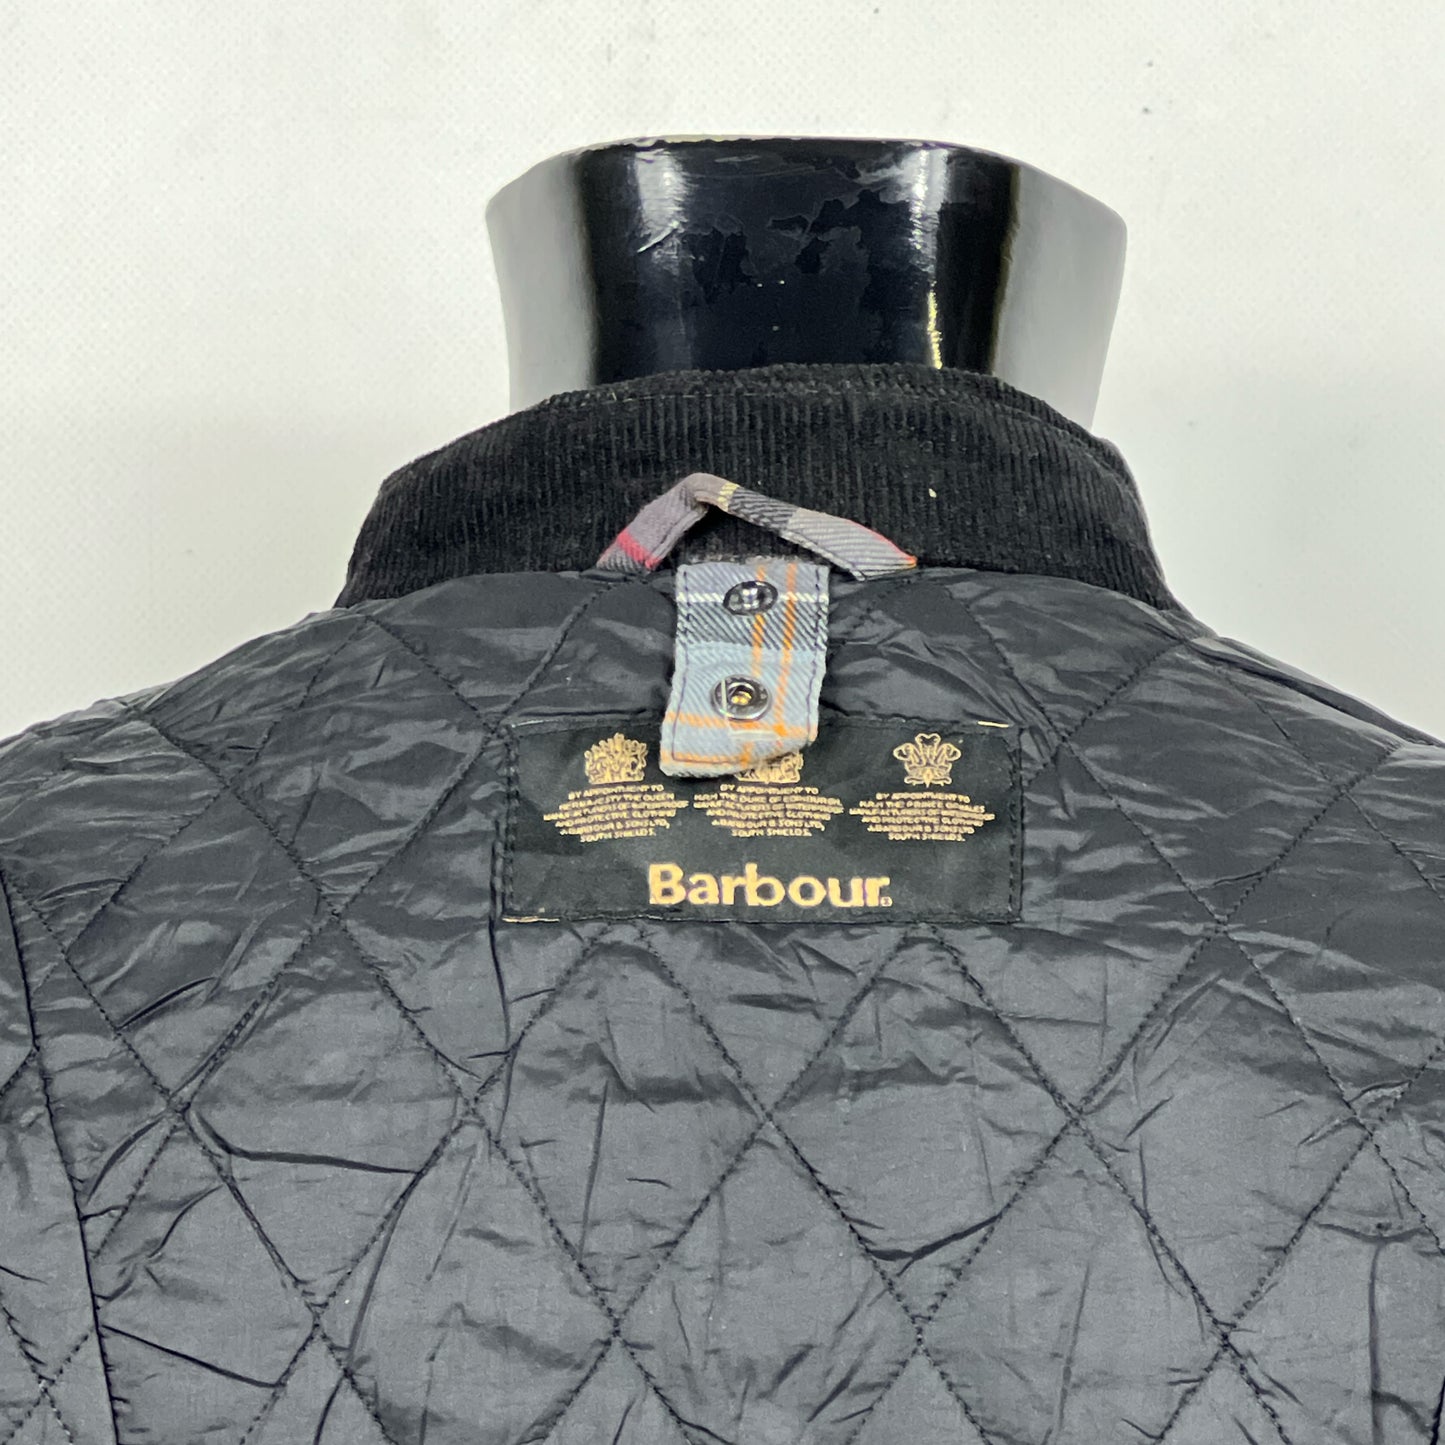 Giacca Barbour donna Belsay grigia UK12 Charcoal waxed lady jacket size Medium